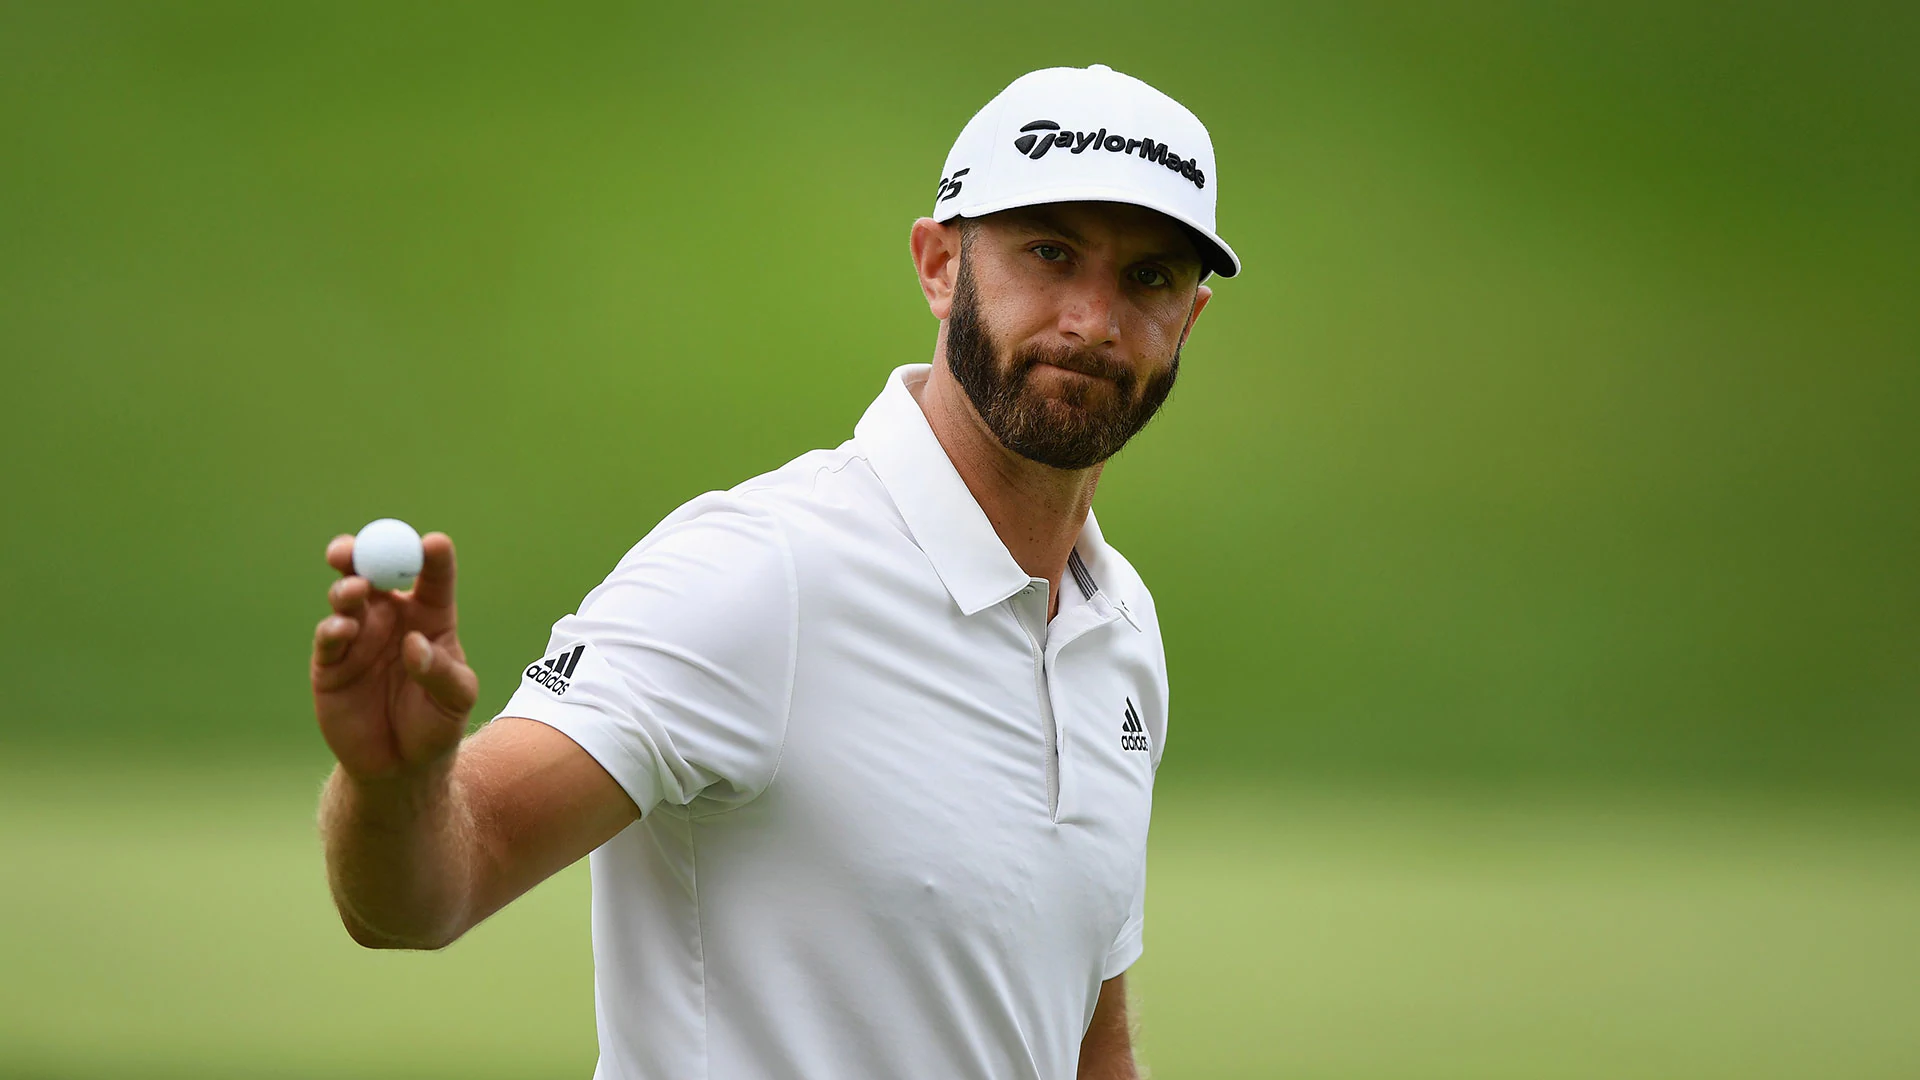 DJ fires 7-under 65, shares lead at Canadian Open